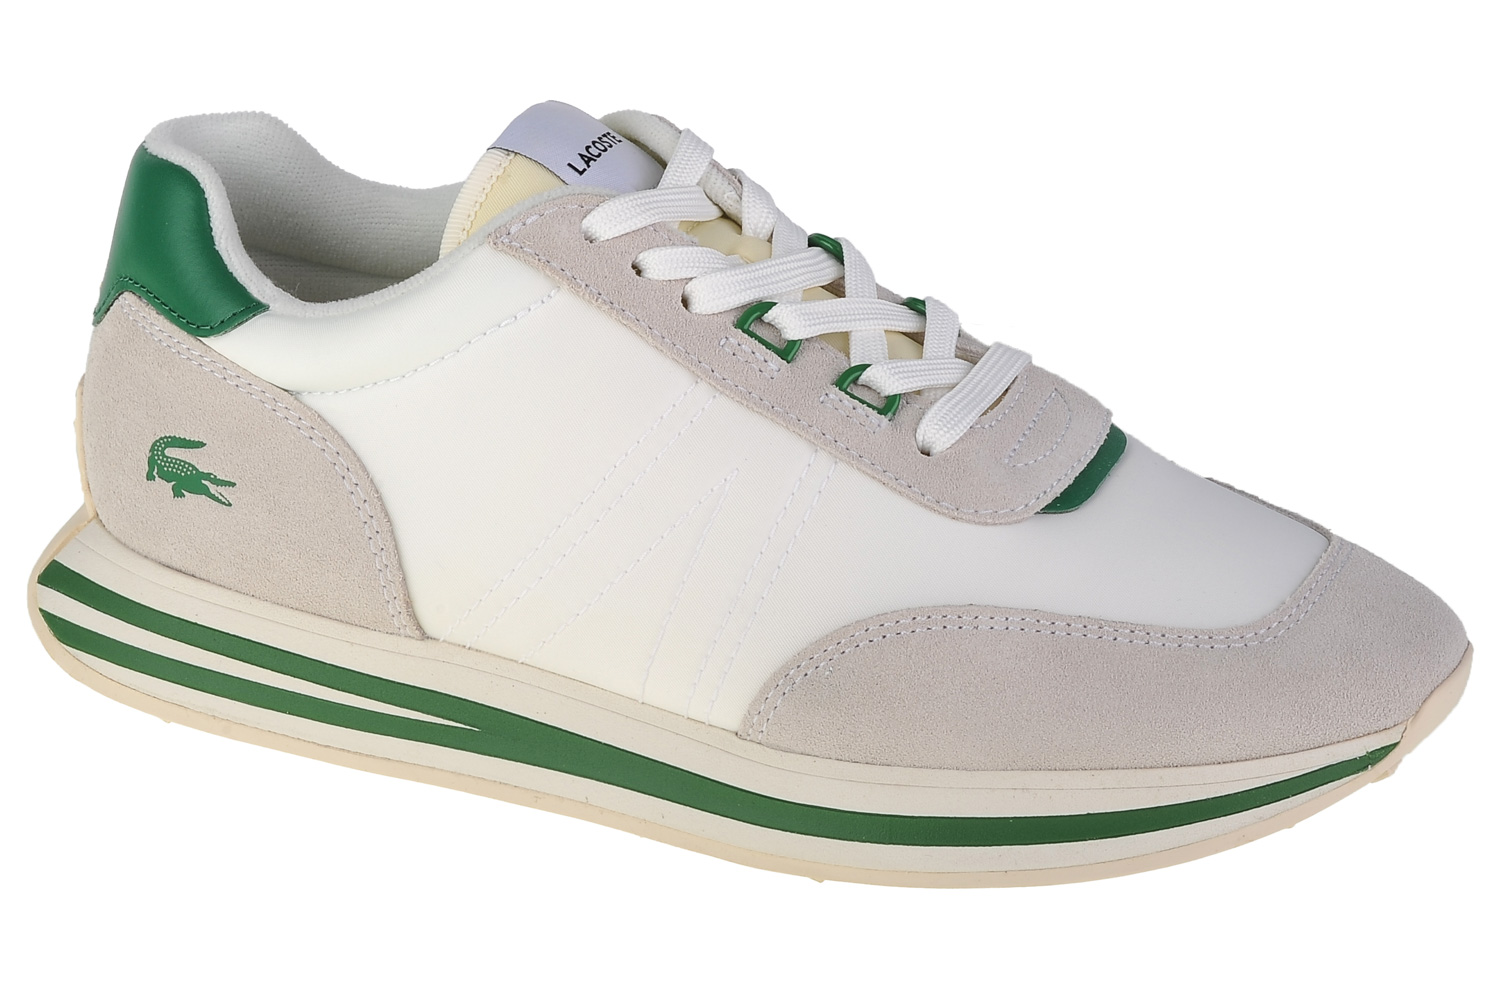 Низкие кроссовки Lacoste Lacoste L Spin, белый низкие кроссовки l spin lacoste цвет off white pink